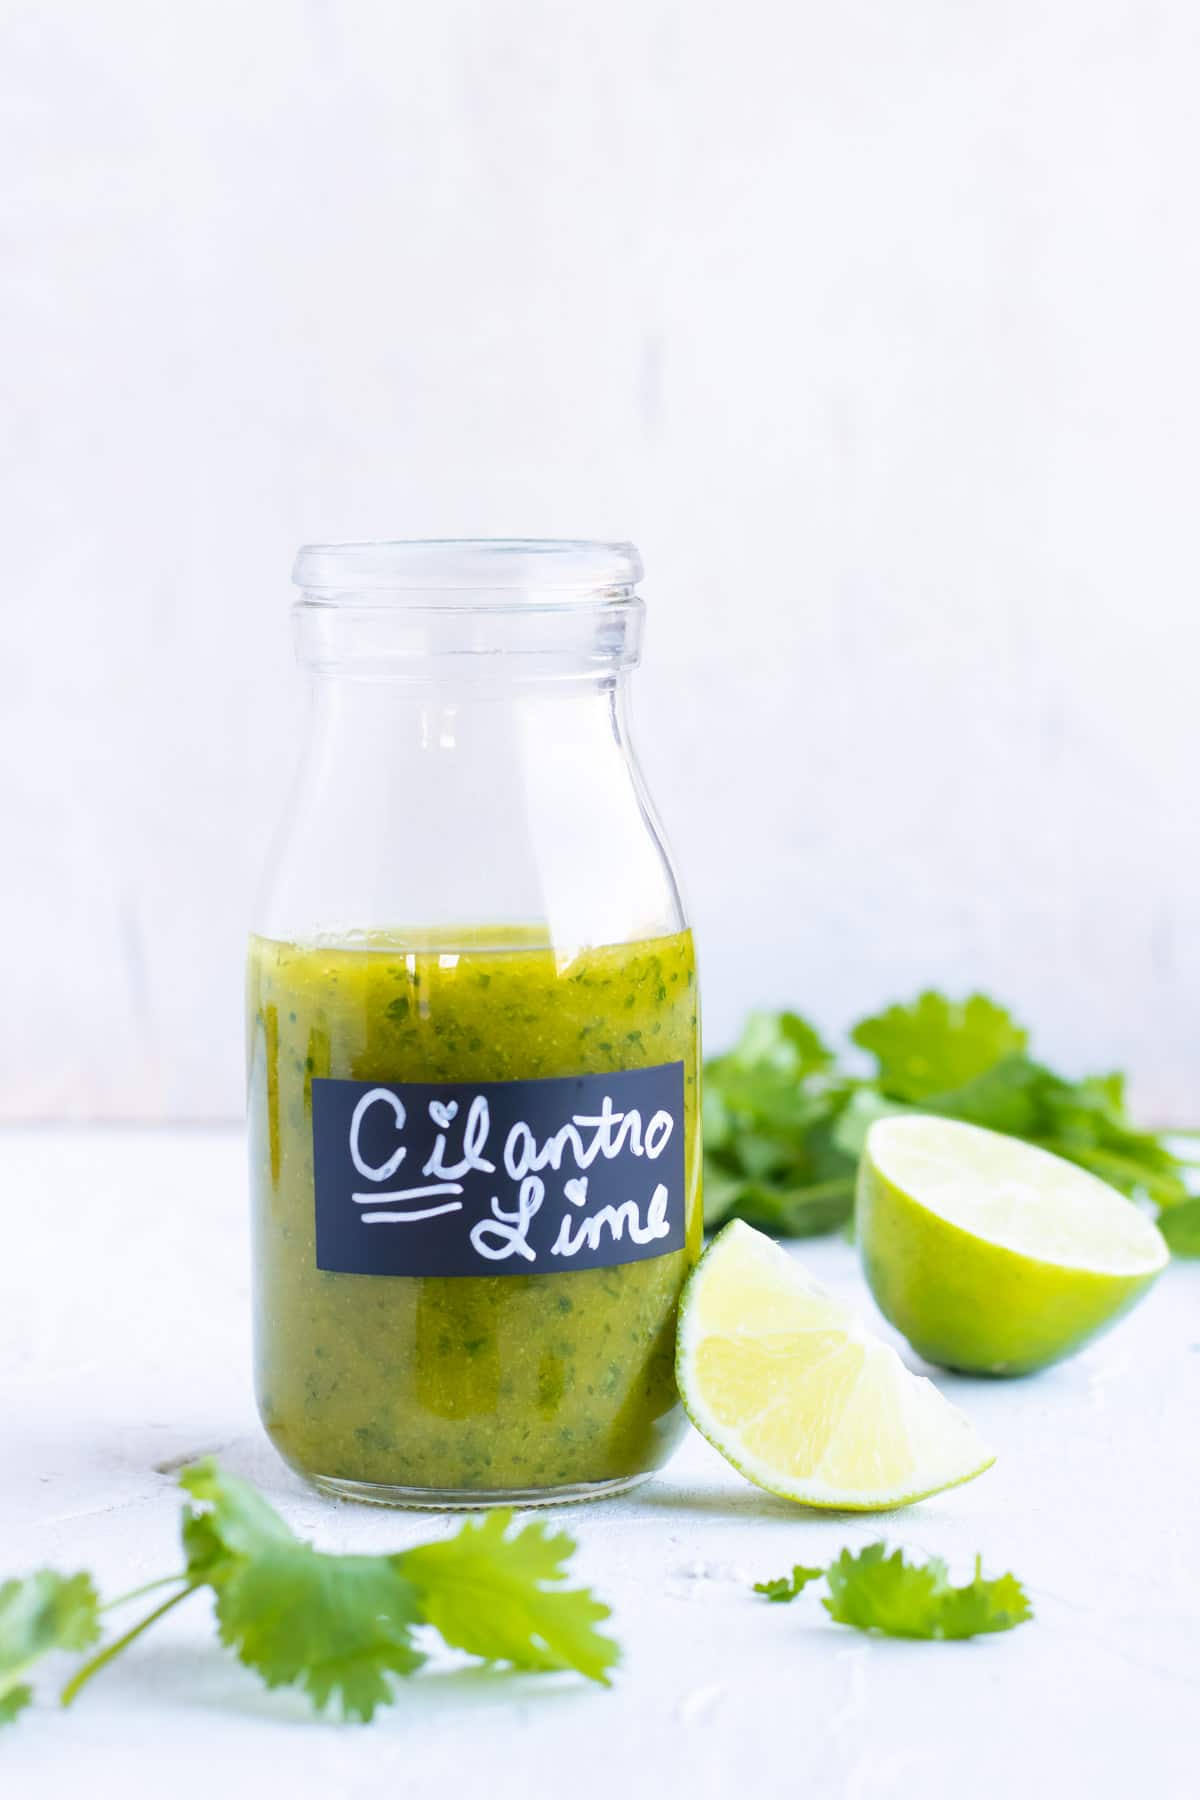 Cilantro lime vinaigrette dressing in a clear glass jar with limes and cilantro next to it.